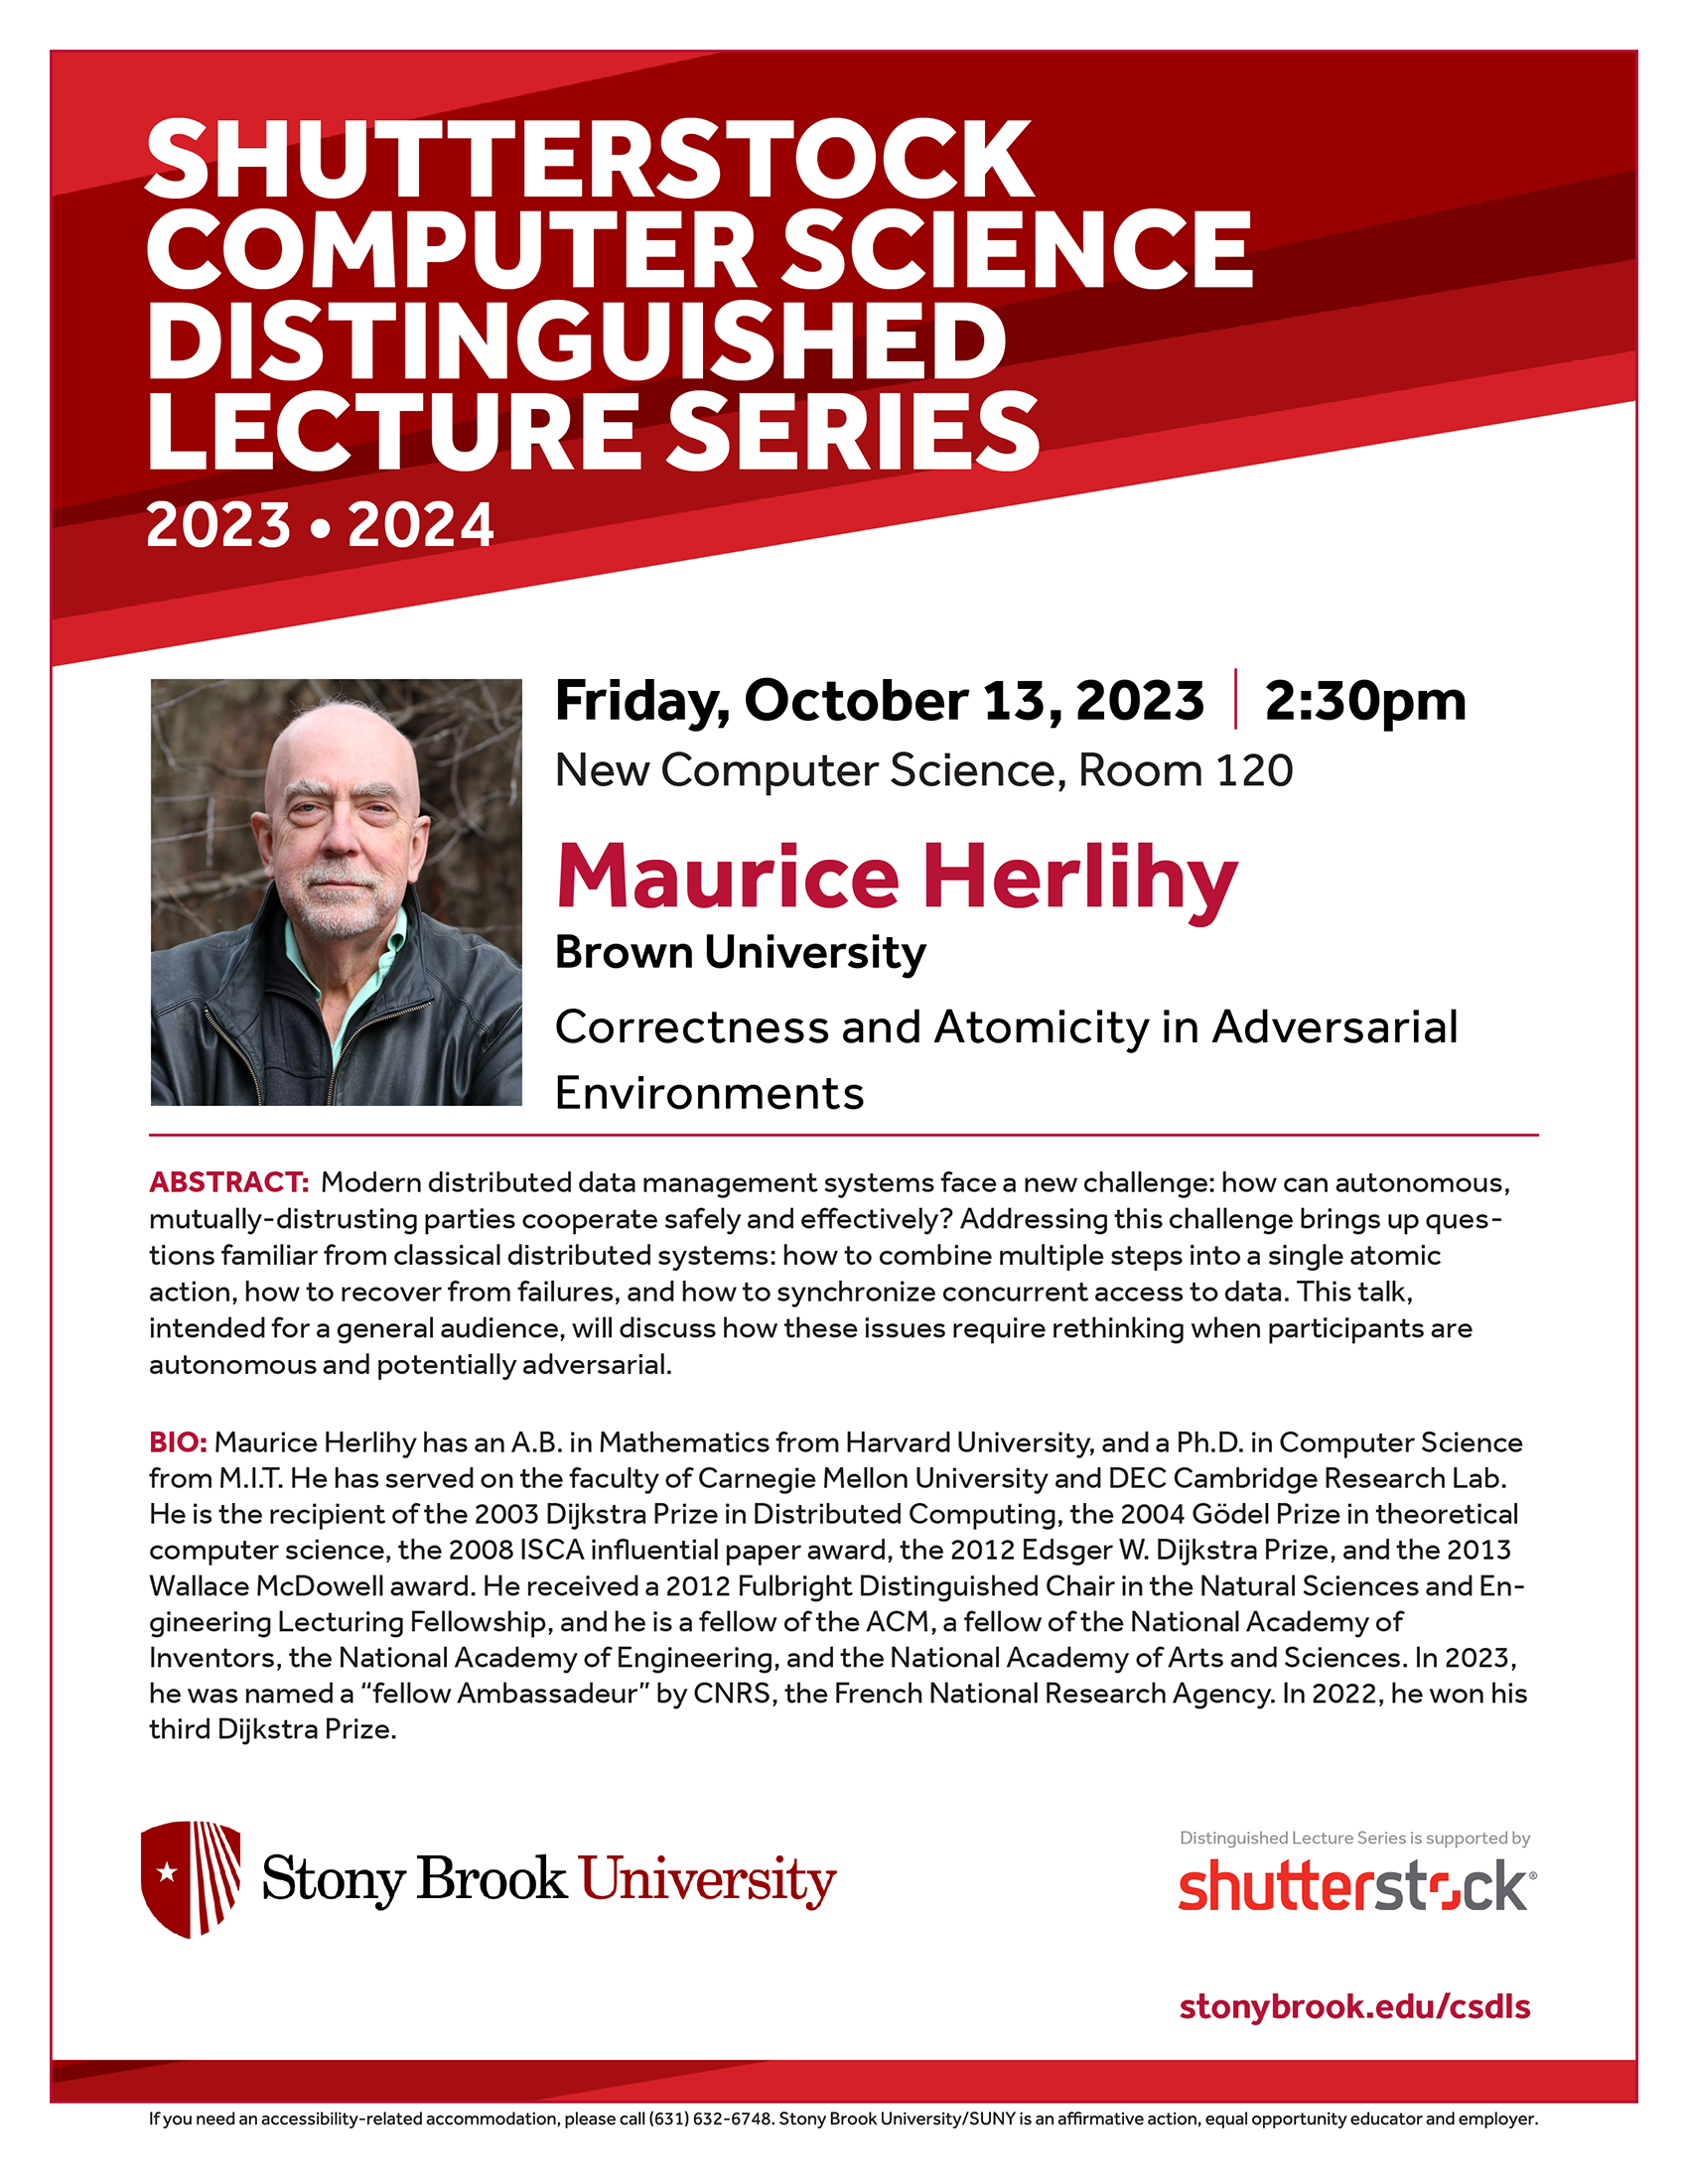 Oct. 13 - Correctness and Atomicity with Maurice Herlihy